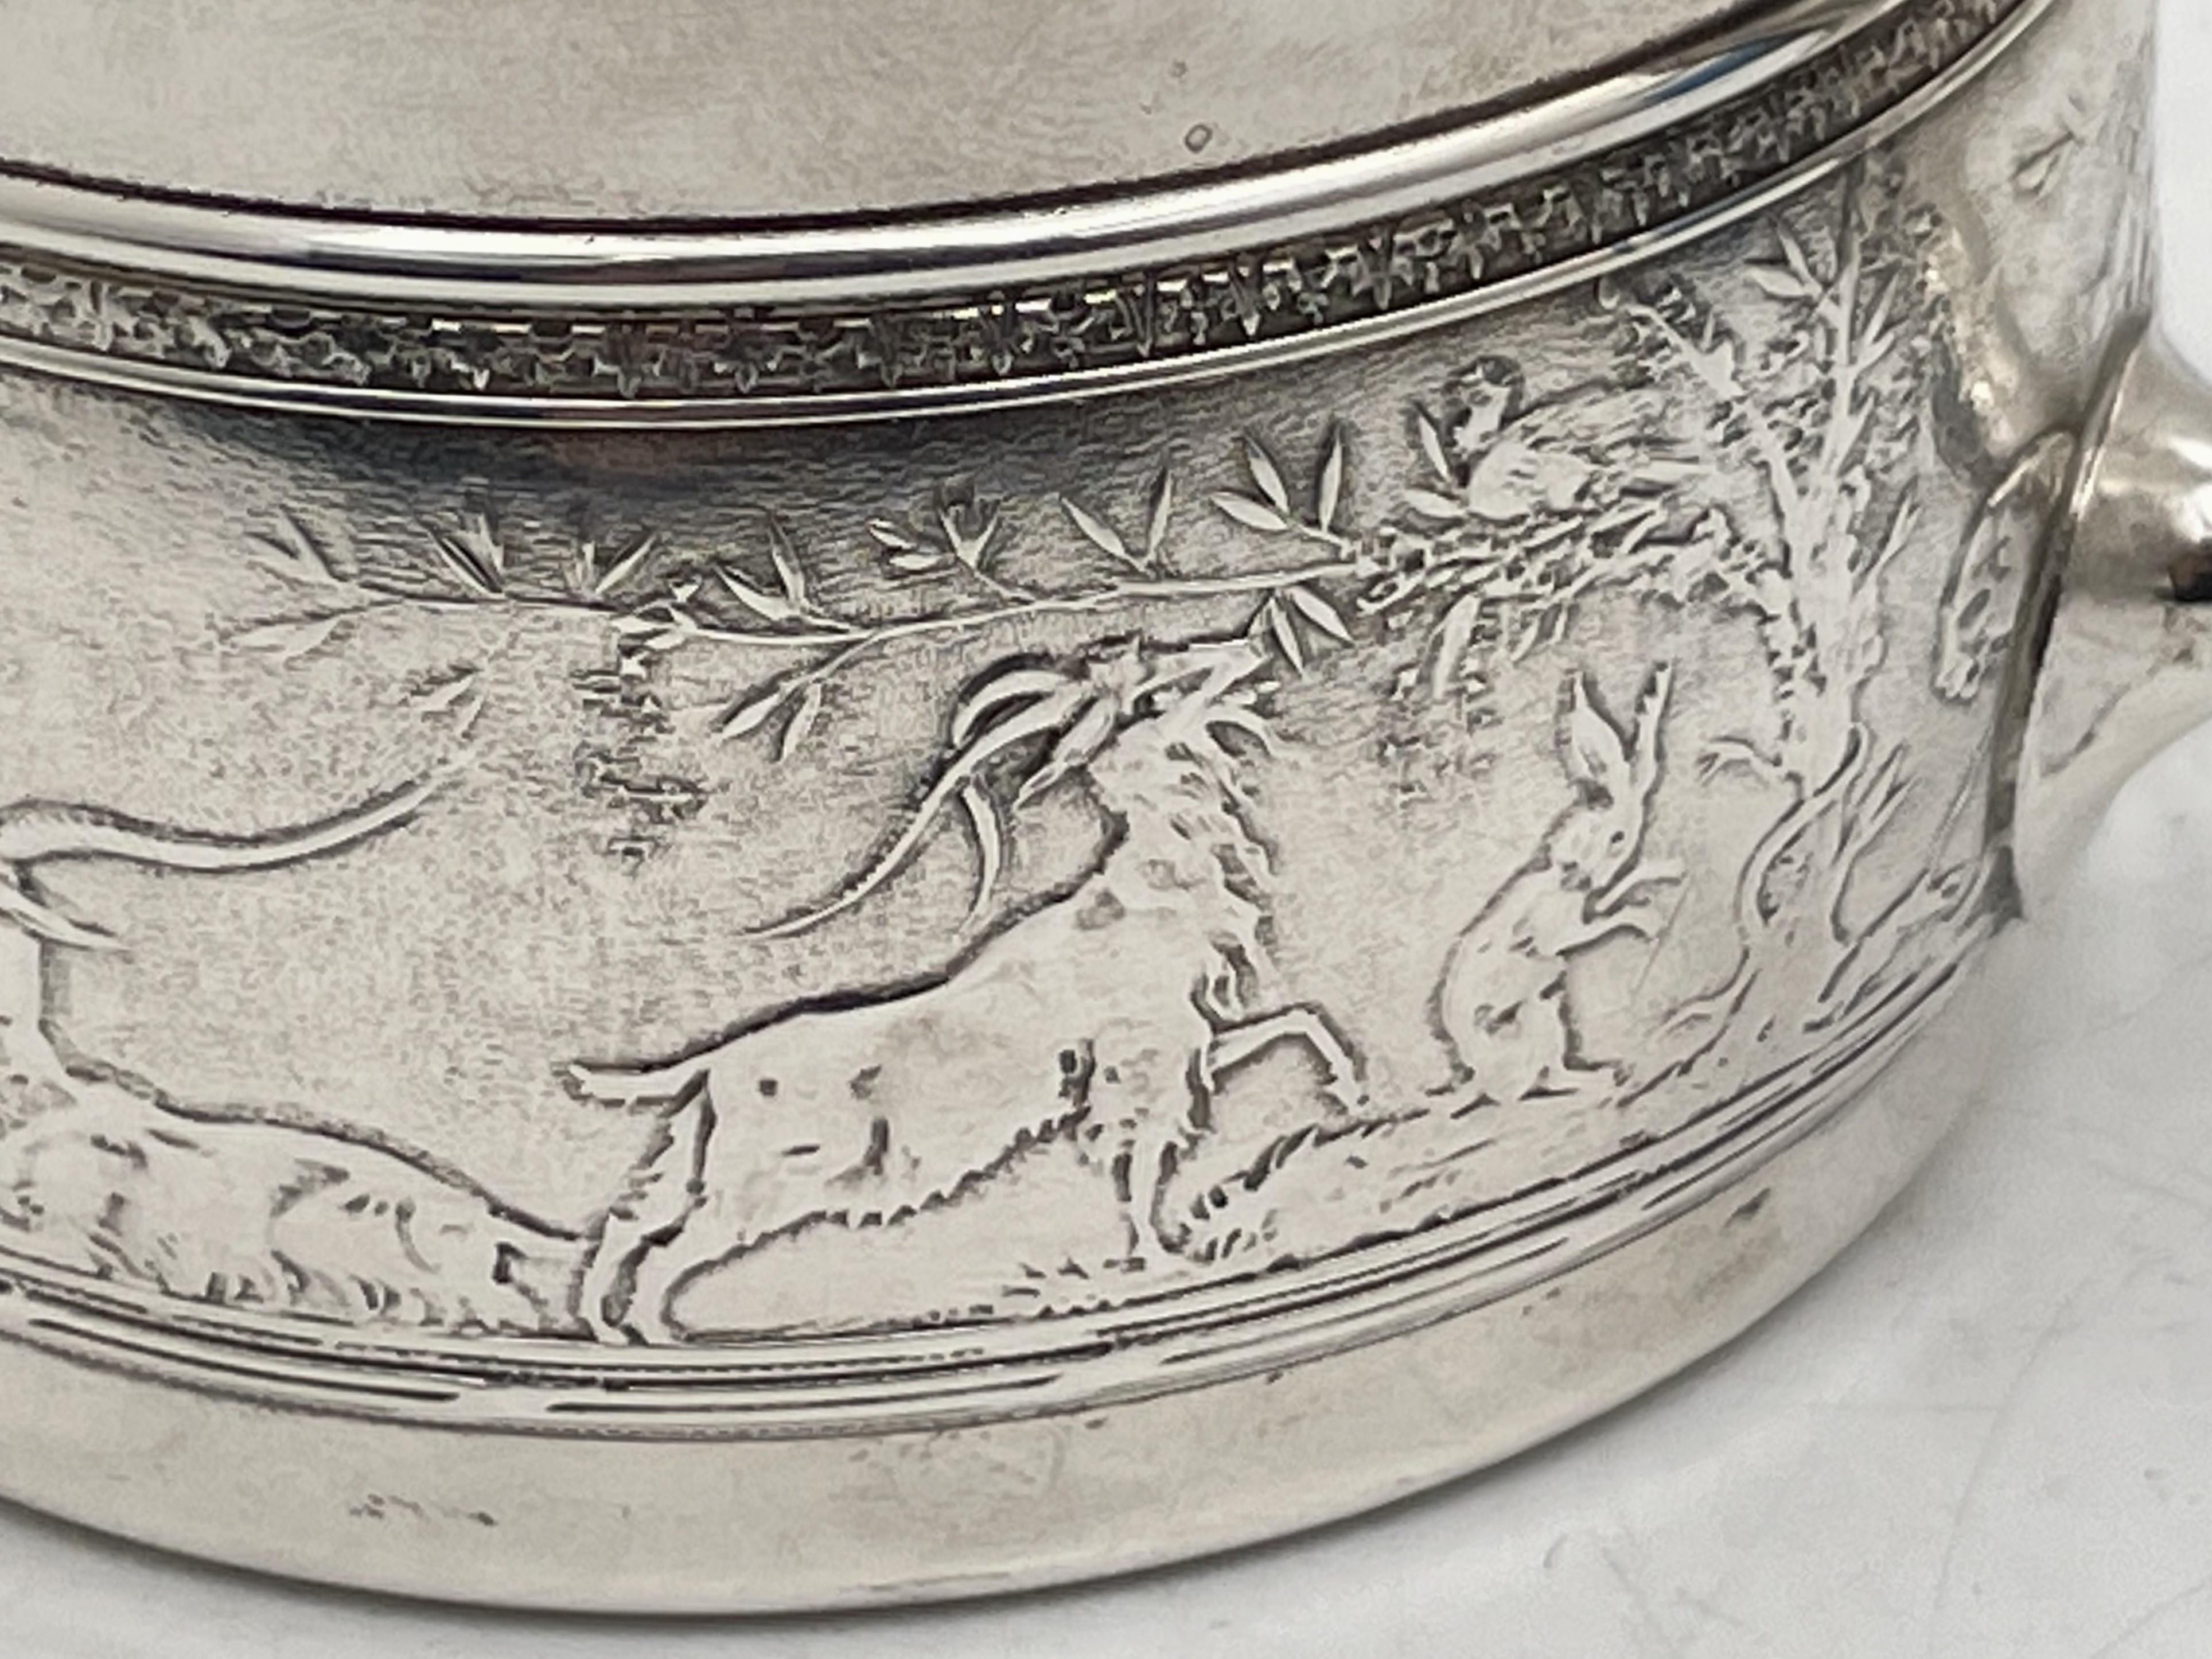 Gorham sterling silver child's or christening mug, made in the early 20th century, gilt inside, adorned with acid-etched motifs including animals, human figures, and trees. It measures 3 1/4'' in height by 3 1/4'' in diameter at the top, weighs 5.1